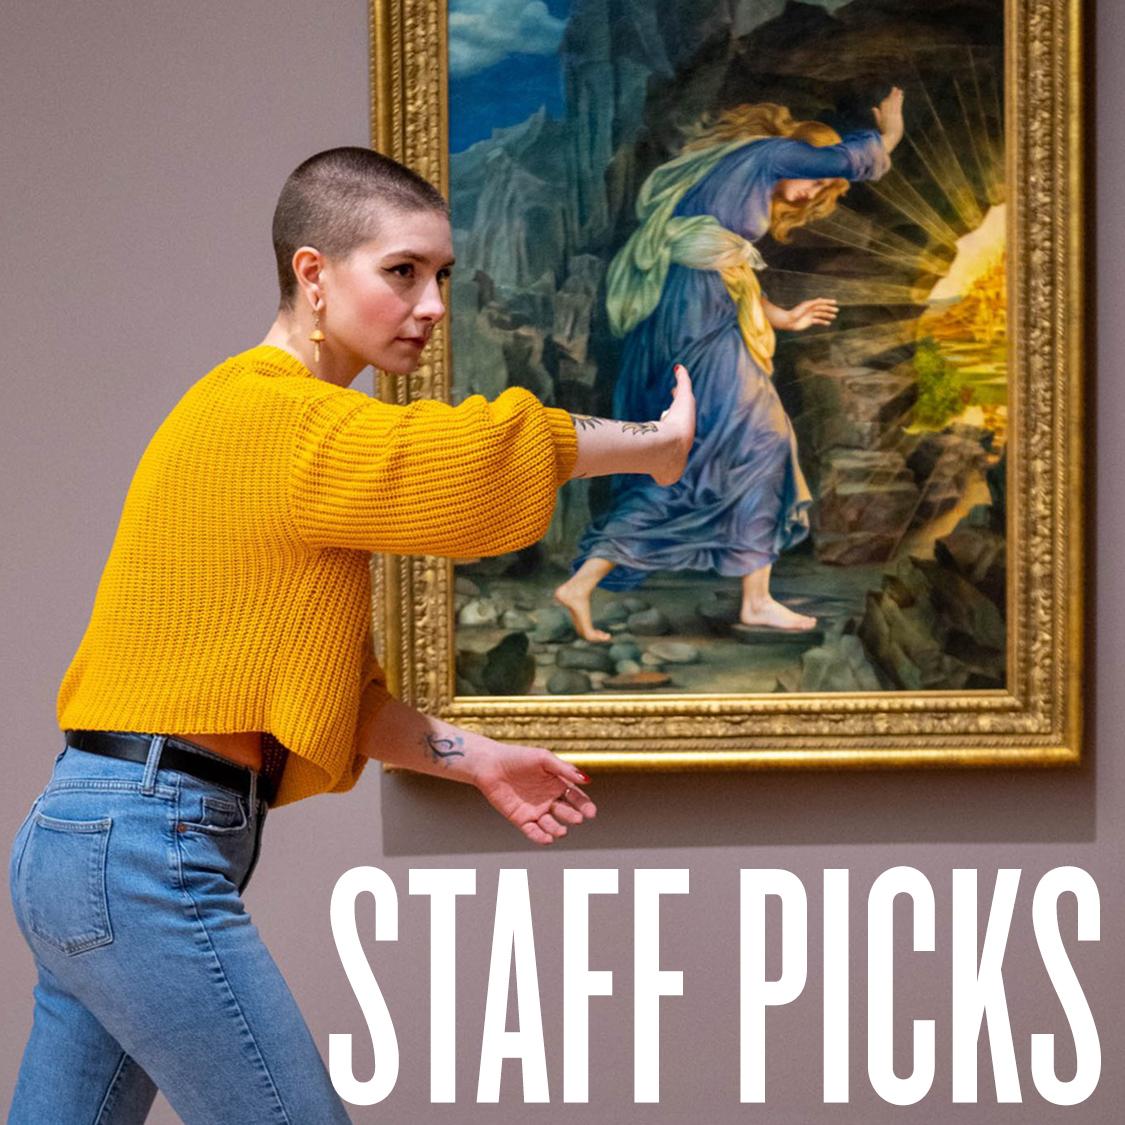 True mimicking the posture of the subject in their favorite painting